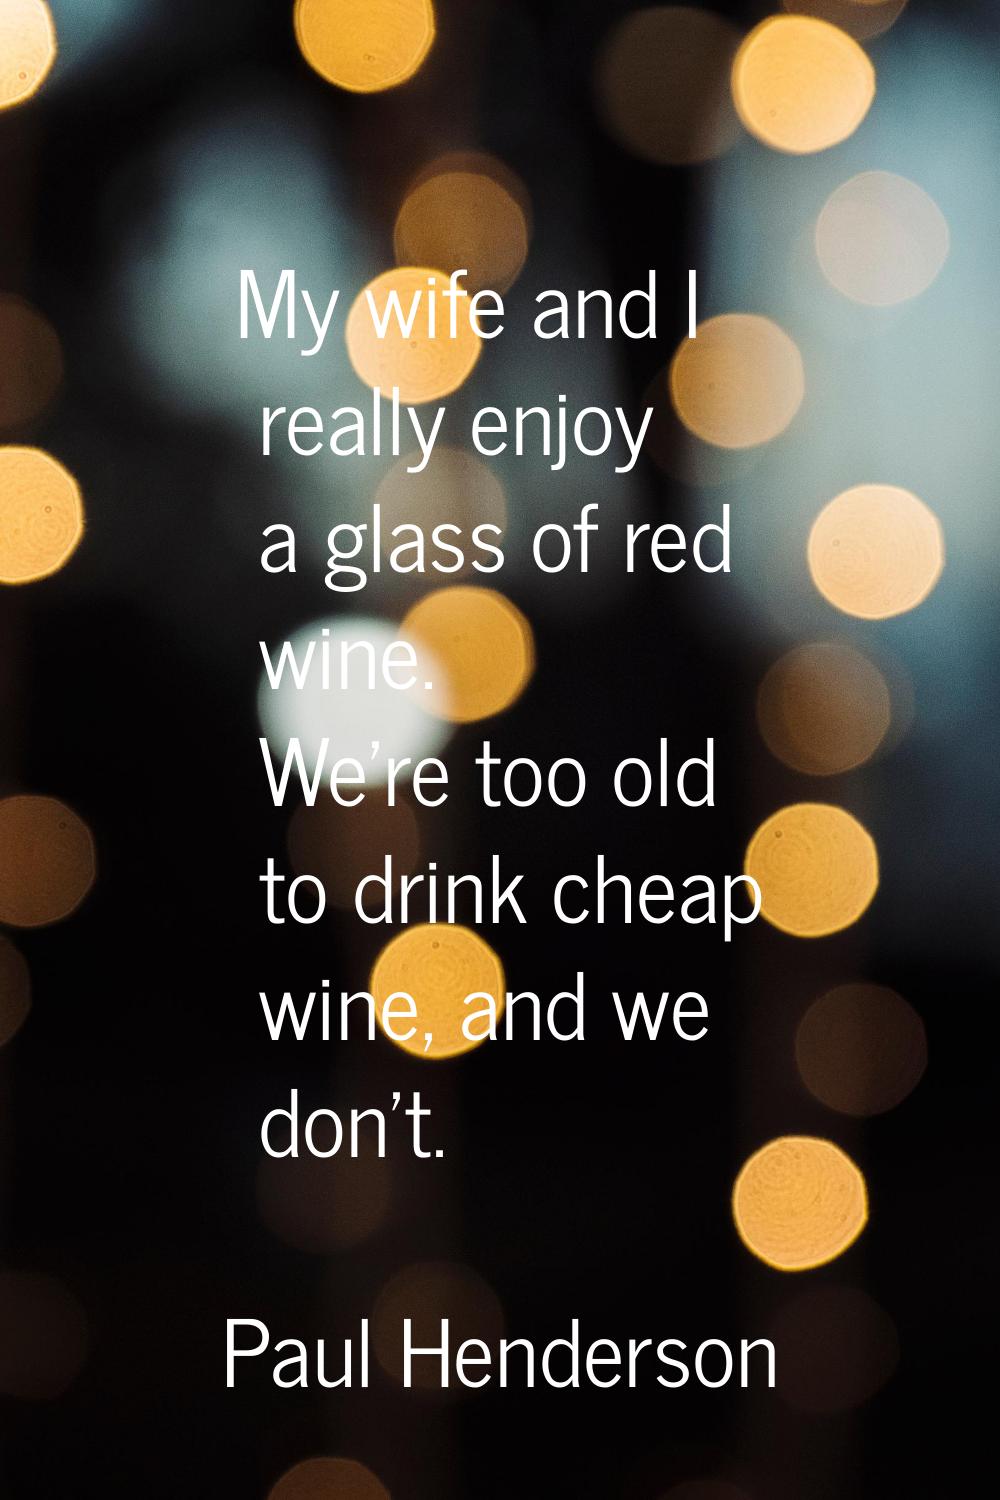 My wife and I really enjoy a glass of red wine. We're too old to drink cheap wine, and we don't.